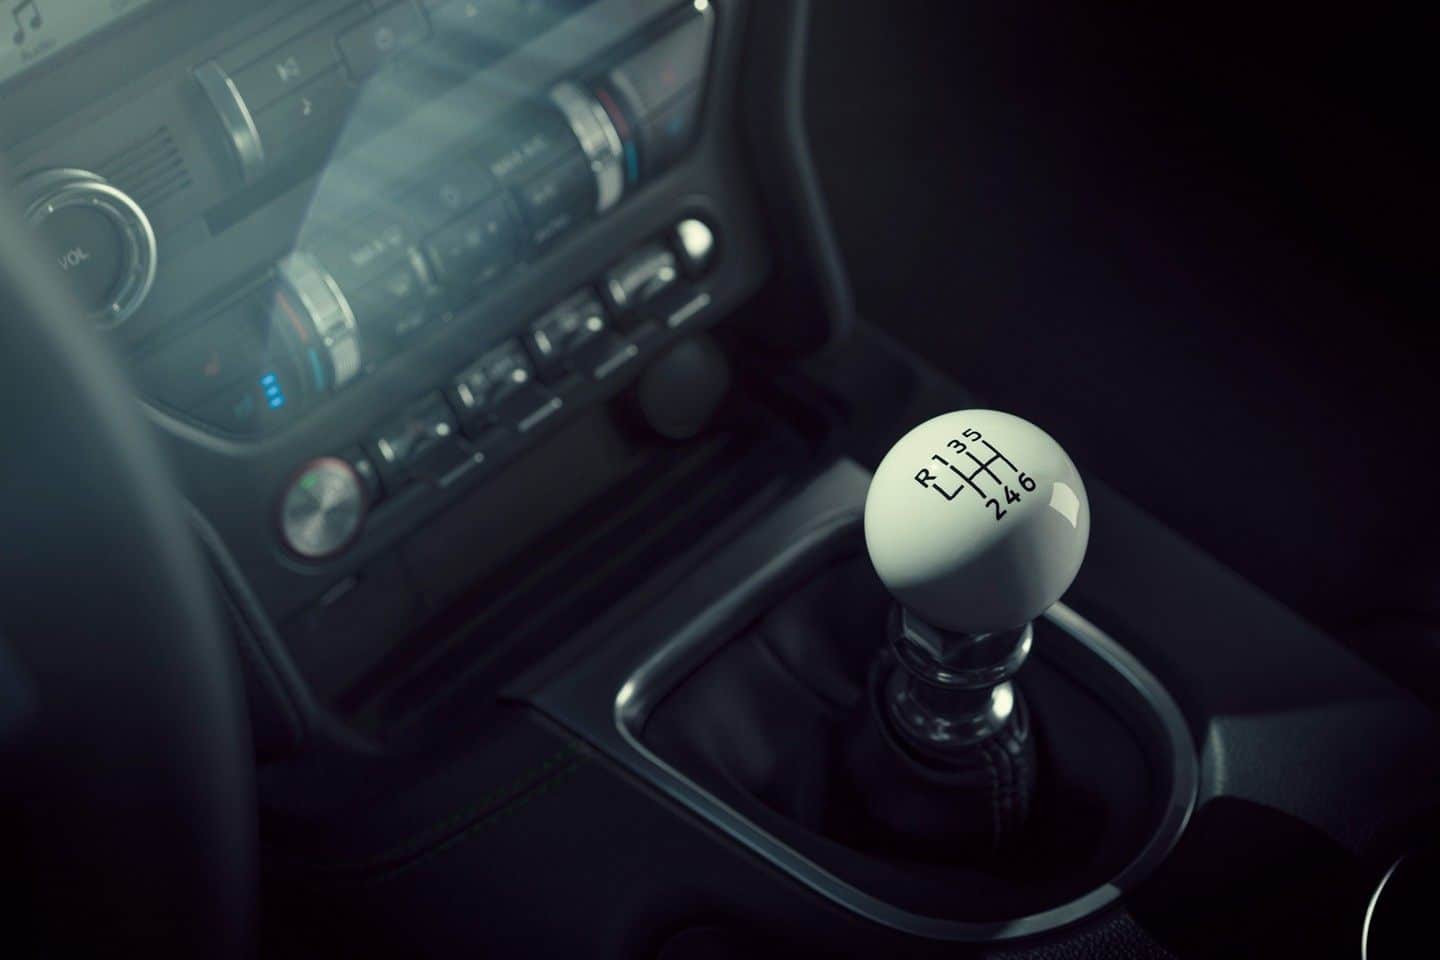 You know what's awesome? A stock six-speed manual with the white cue ball shifter, that's what. | Ford Motor Company photo